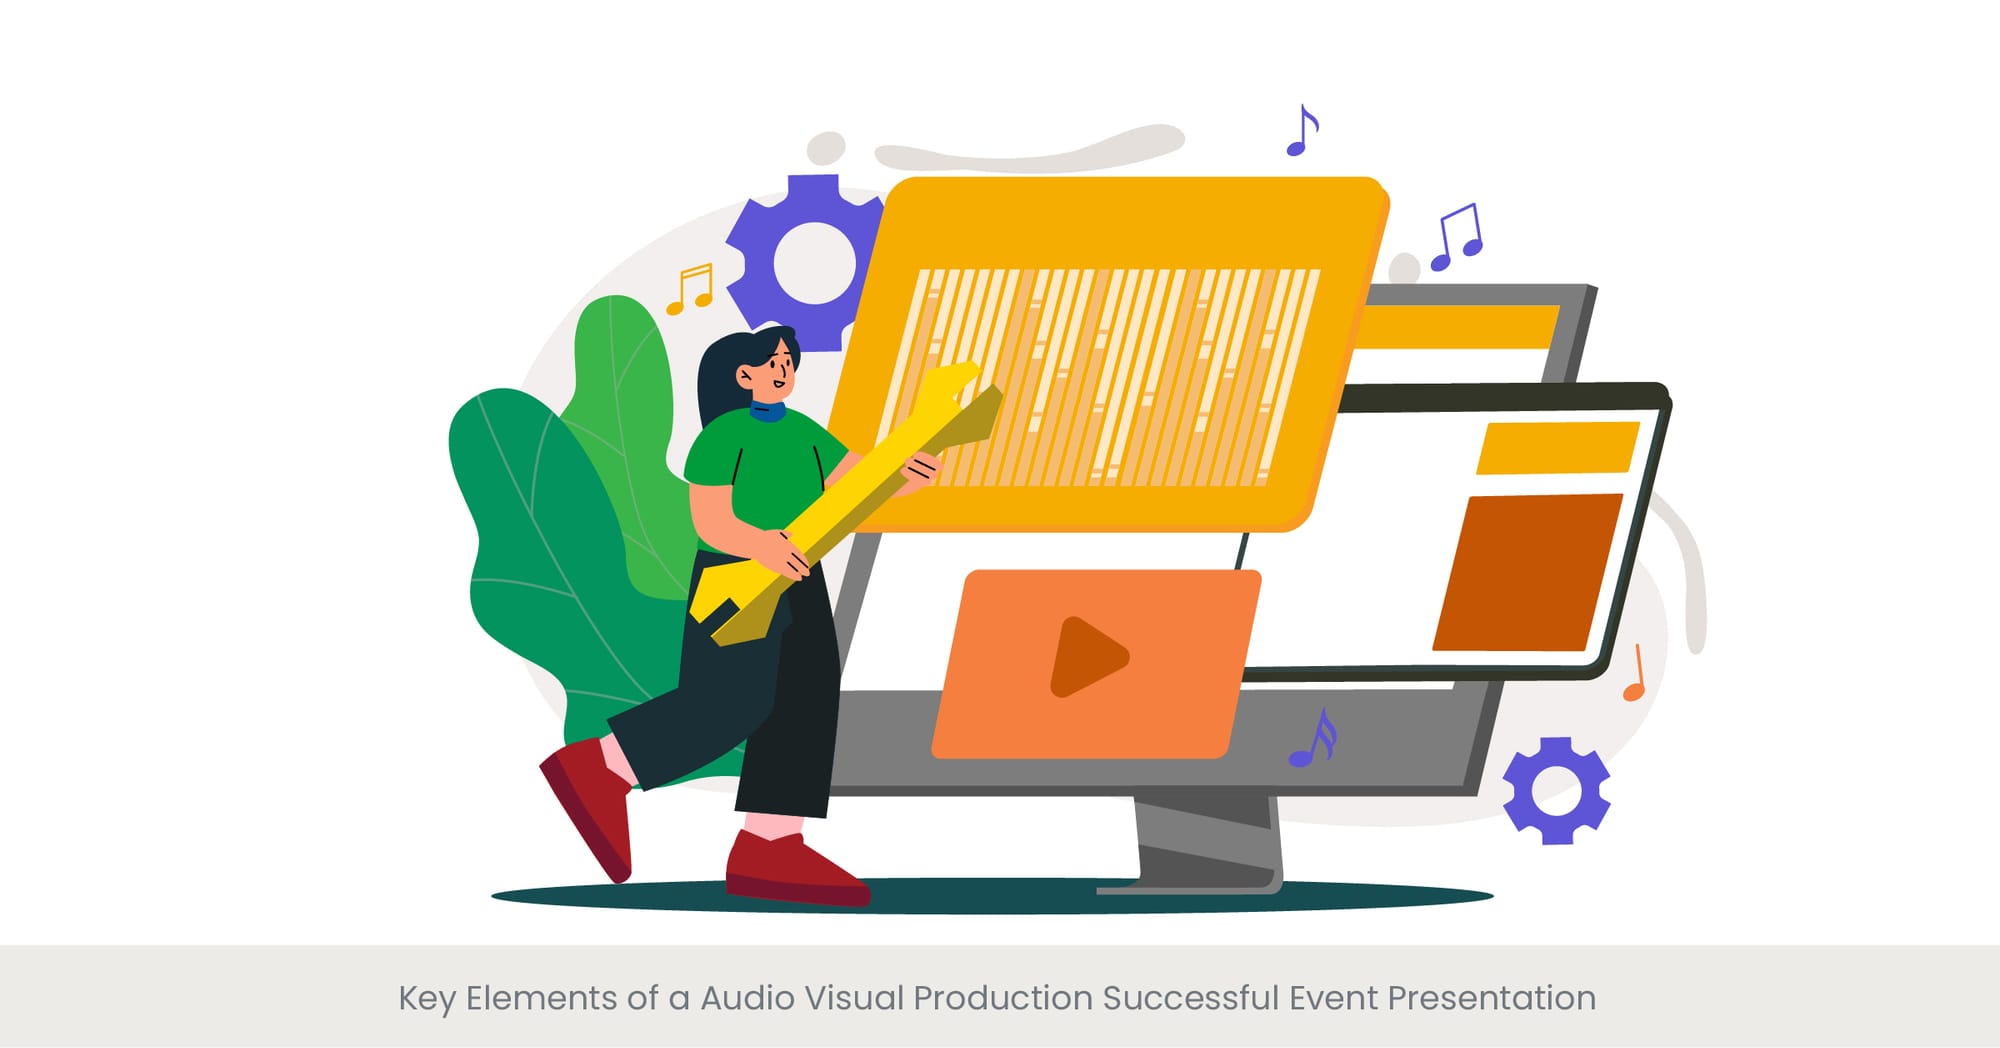 Key Elements of a Audio Visual Production Successful Event Presentation